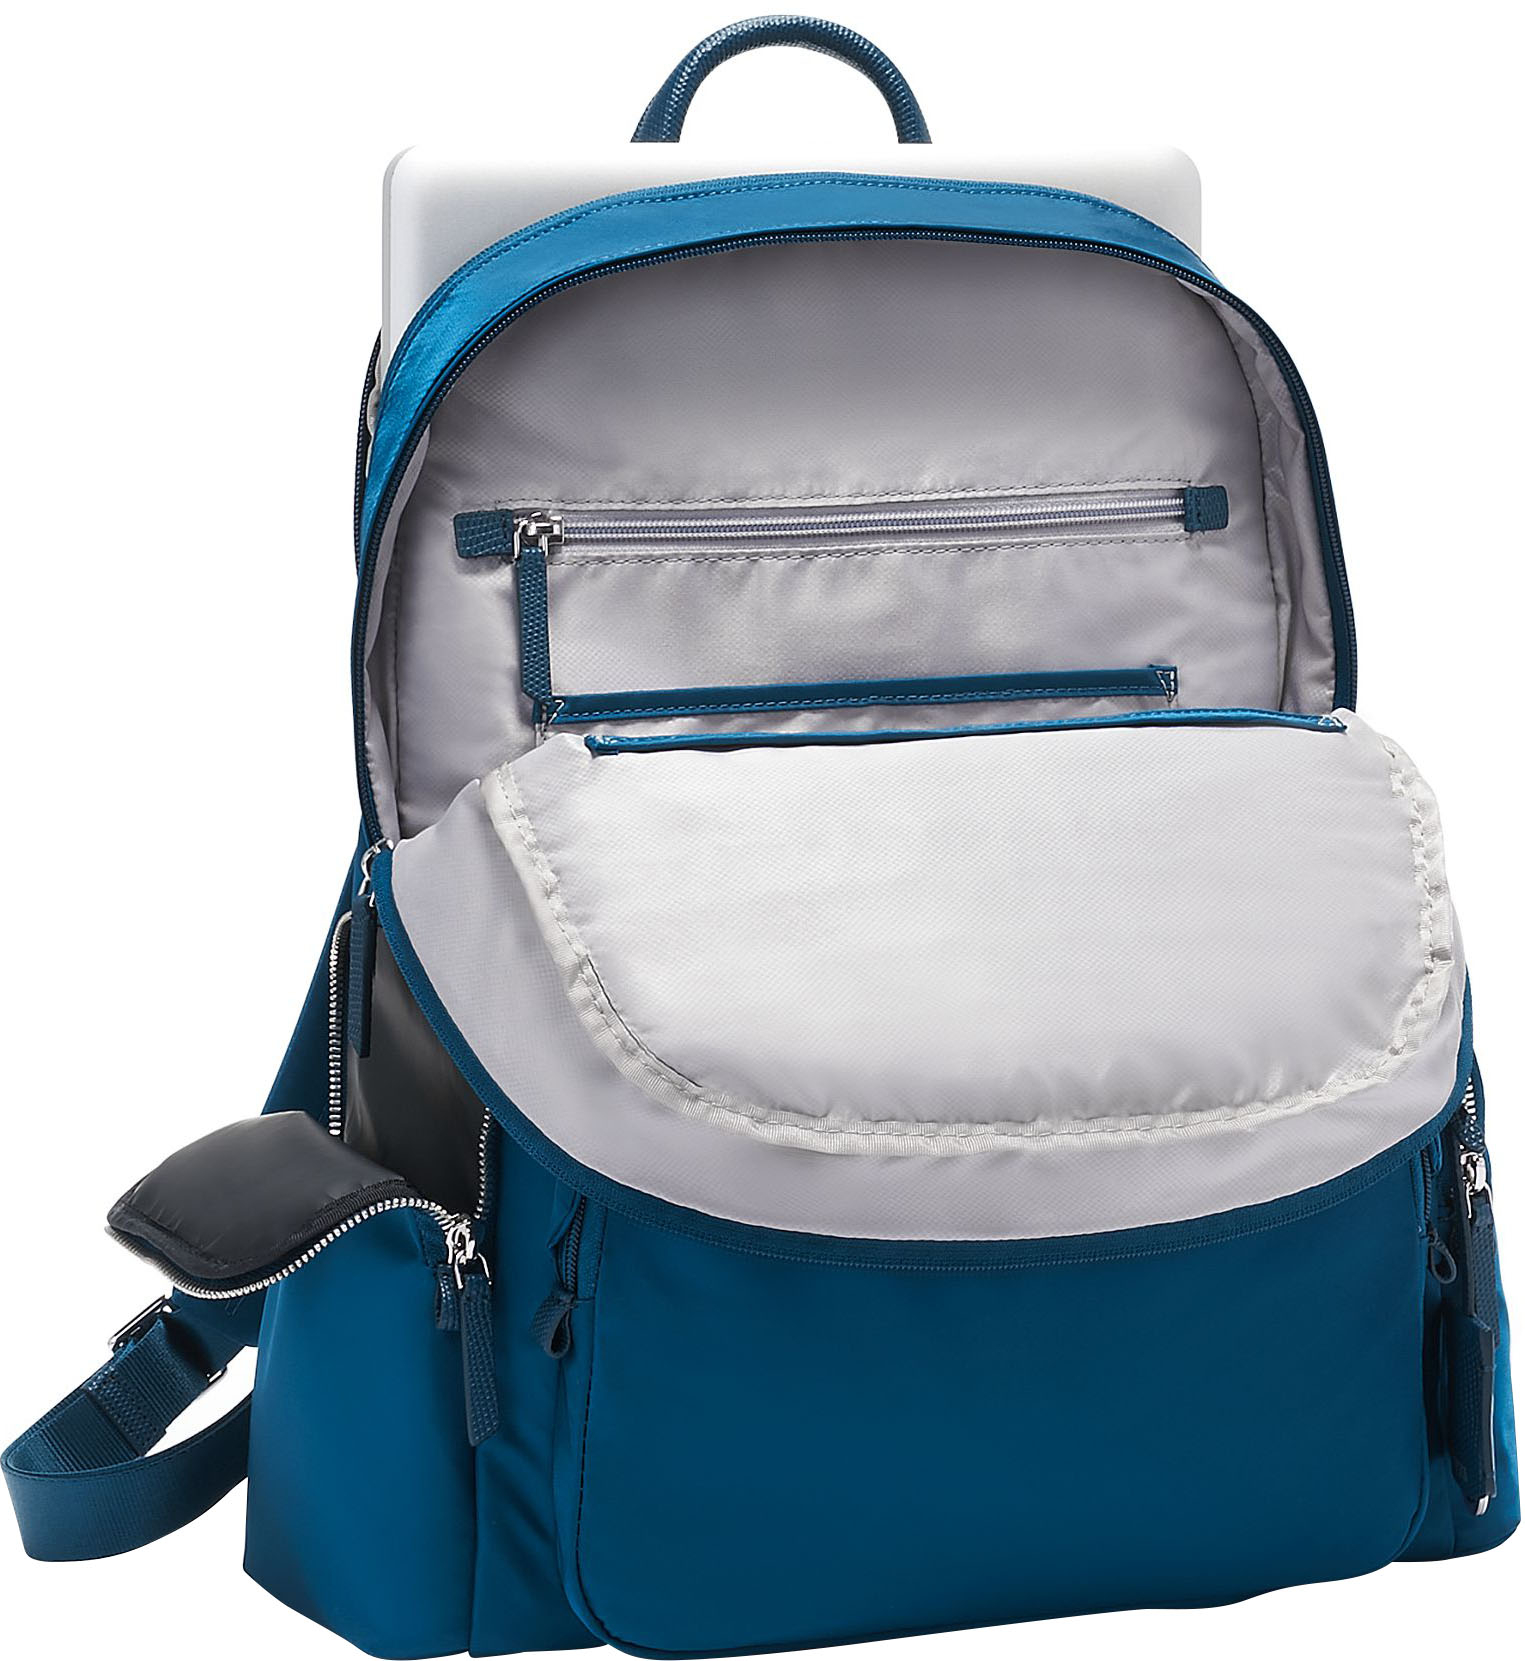 Angle View: TUMI - Voyageur Carson Backpack - Blue